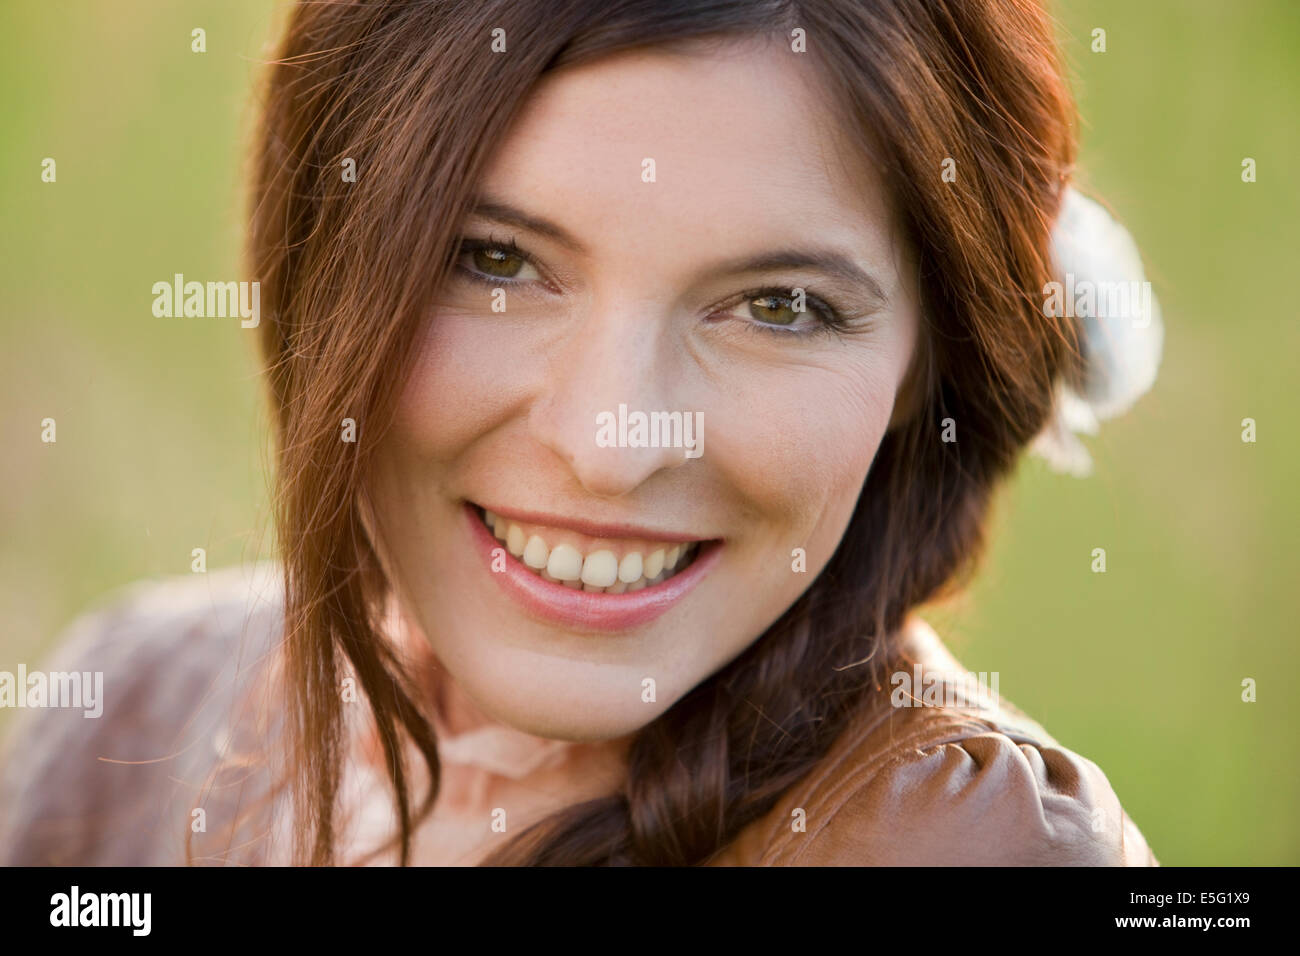 Woman with long brunette hair Stock Photo